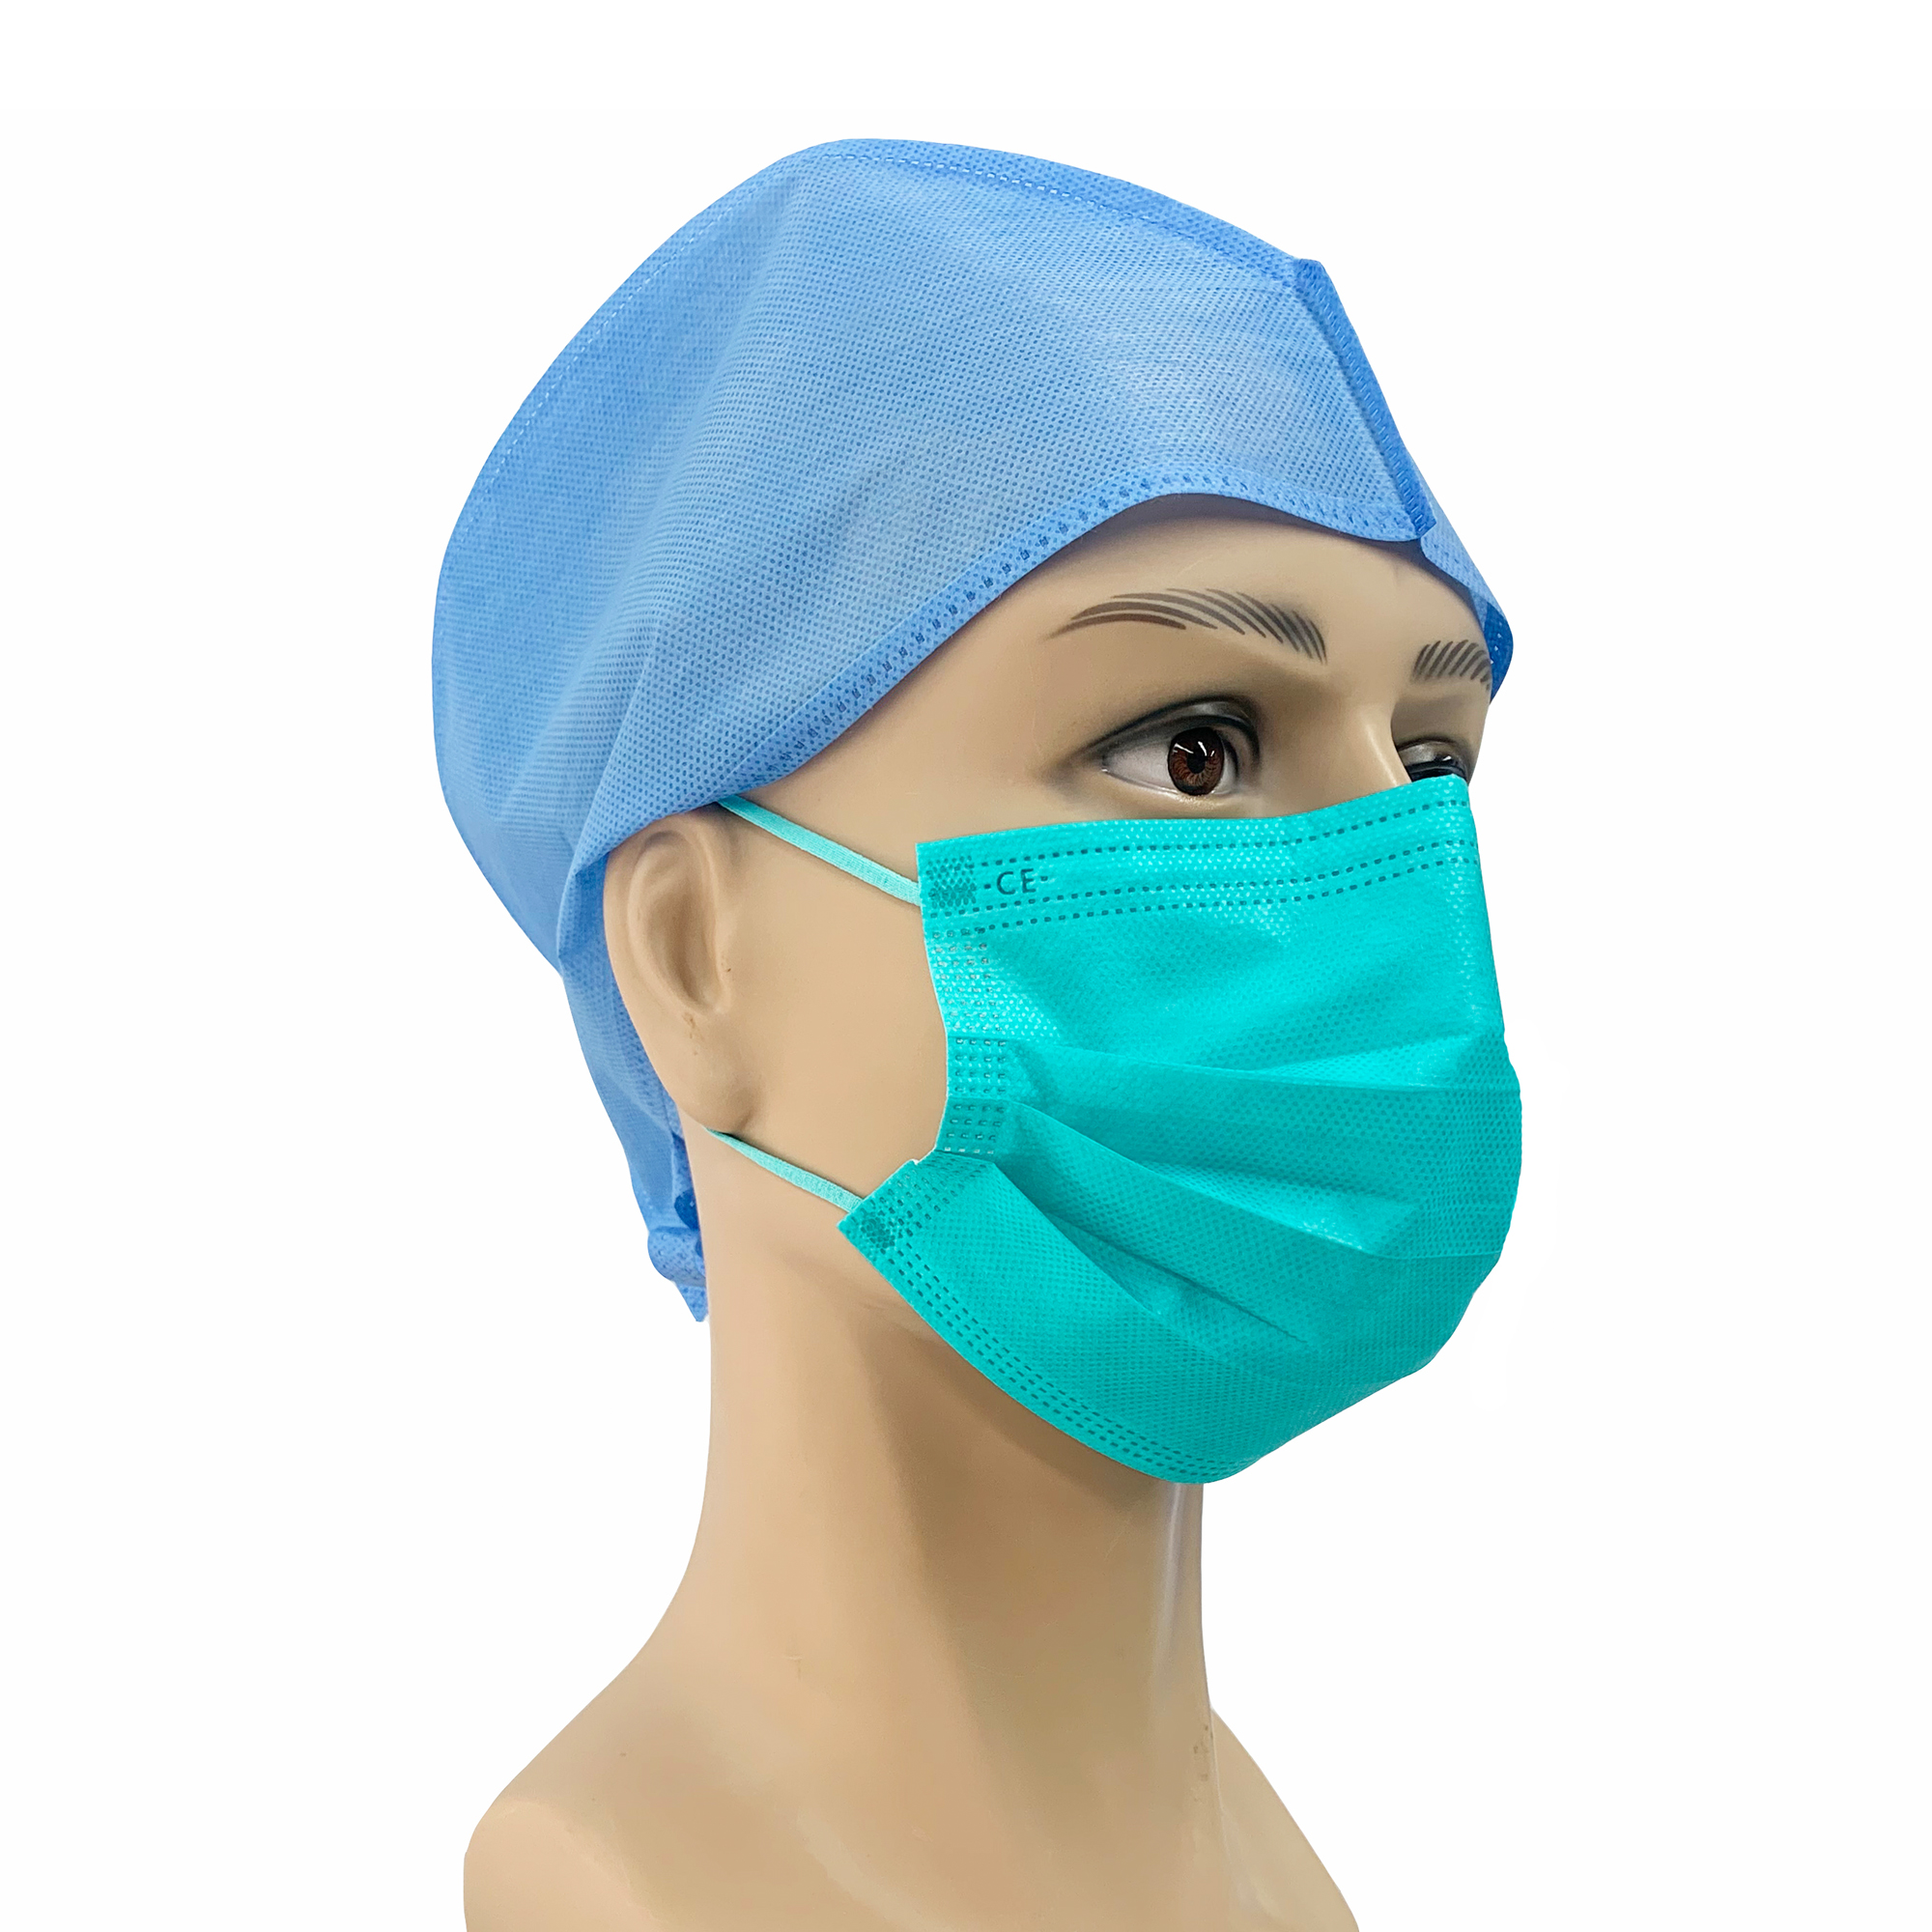 Disposable Earloop 3-Ply Nonwoven Face Masks Colorful